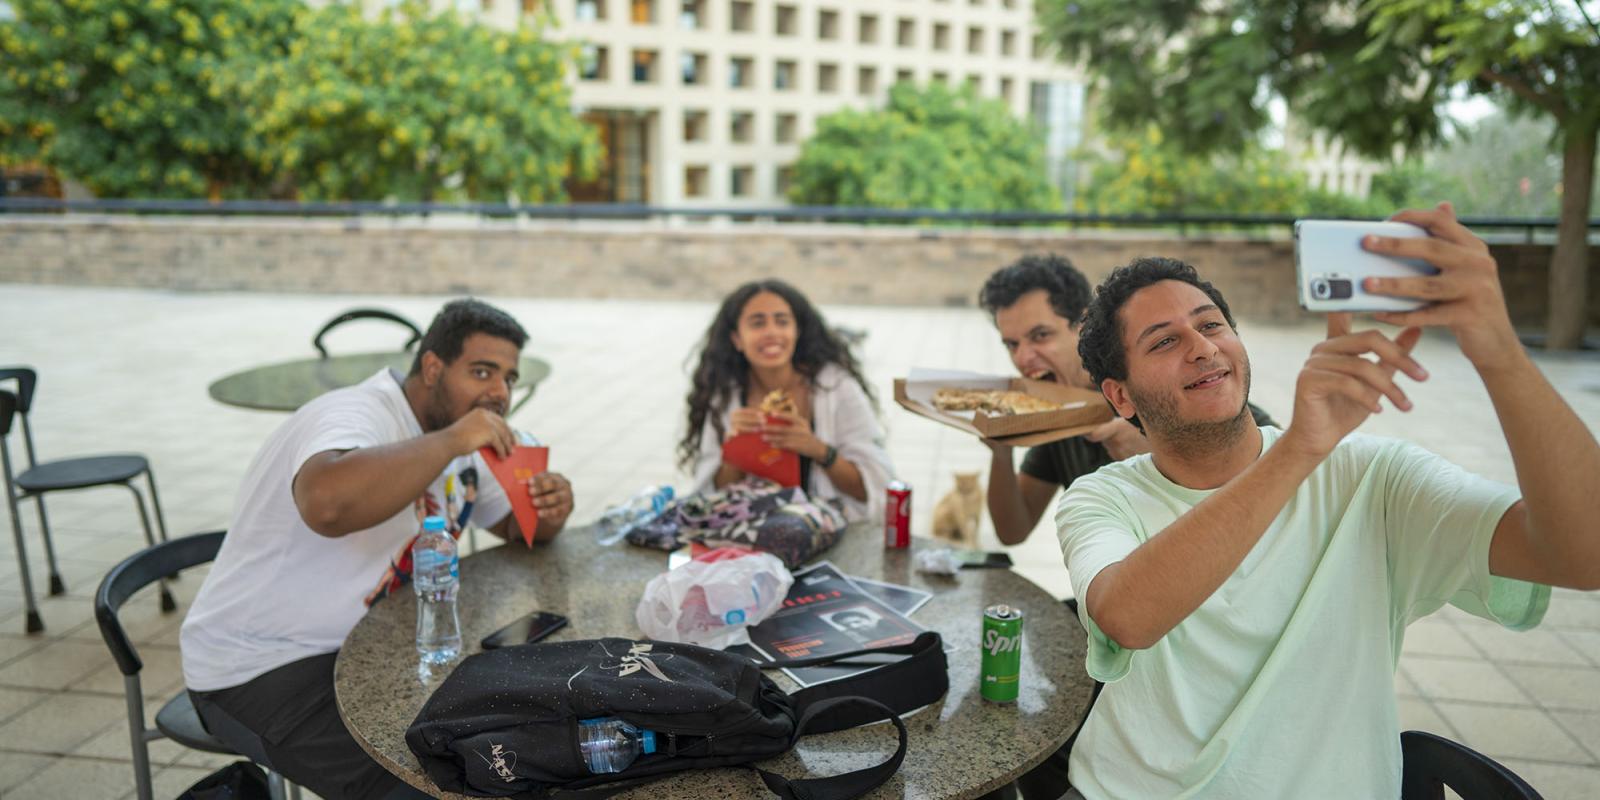 Group of girls and boys sitting outdoors taking a selfie while eating